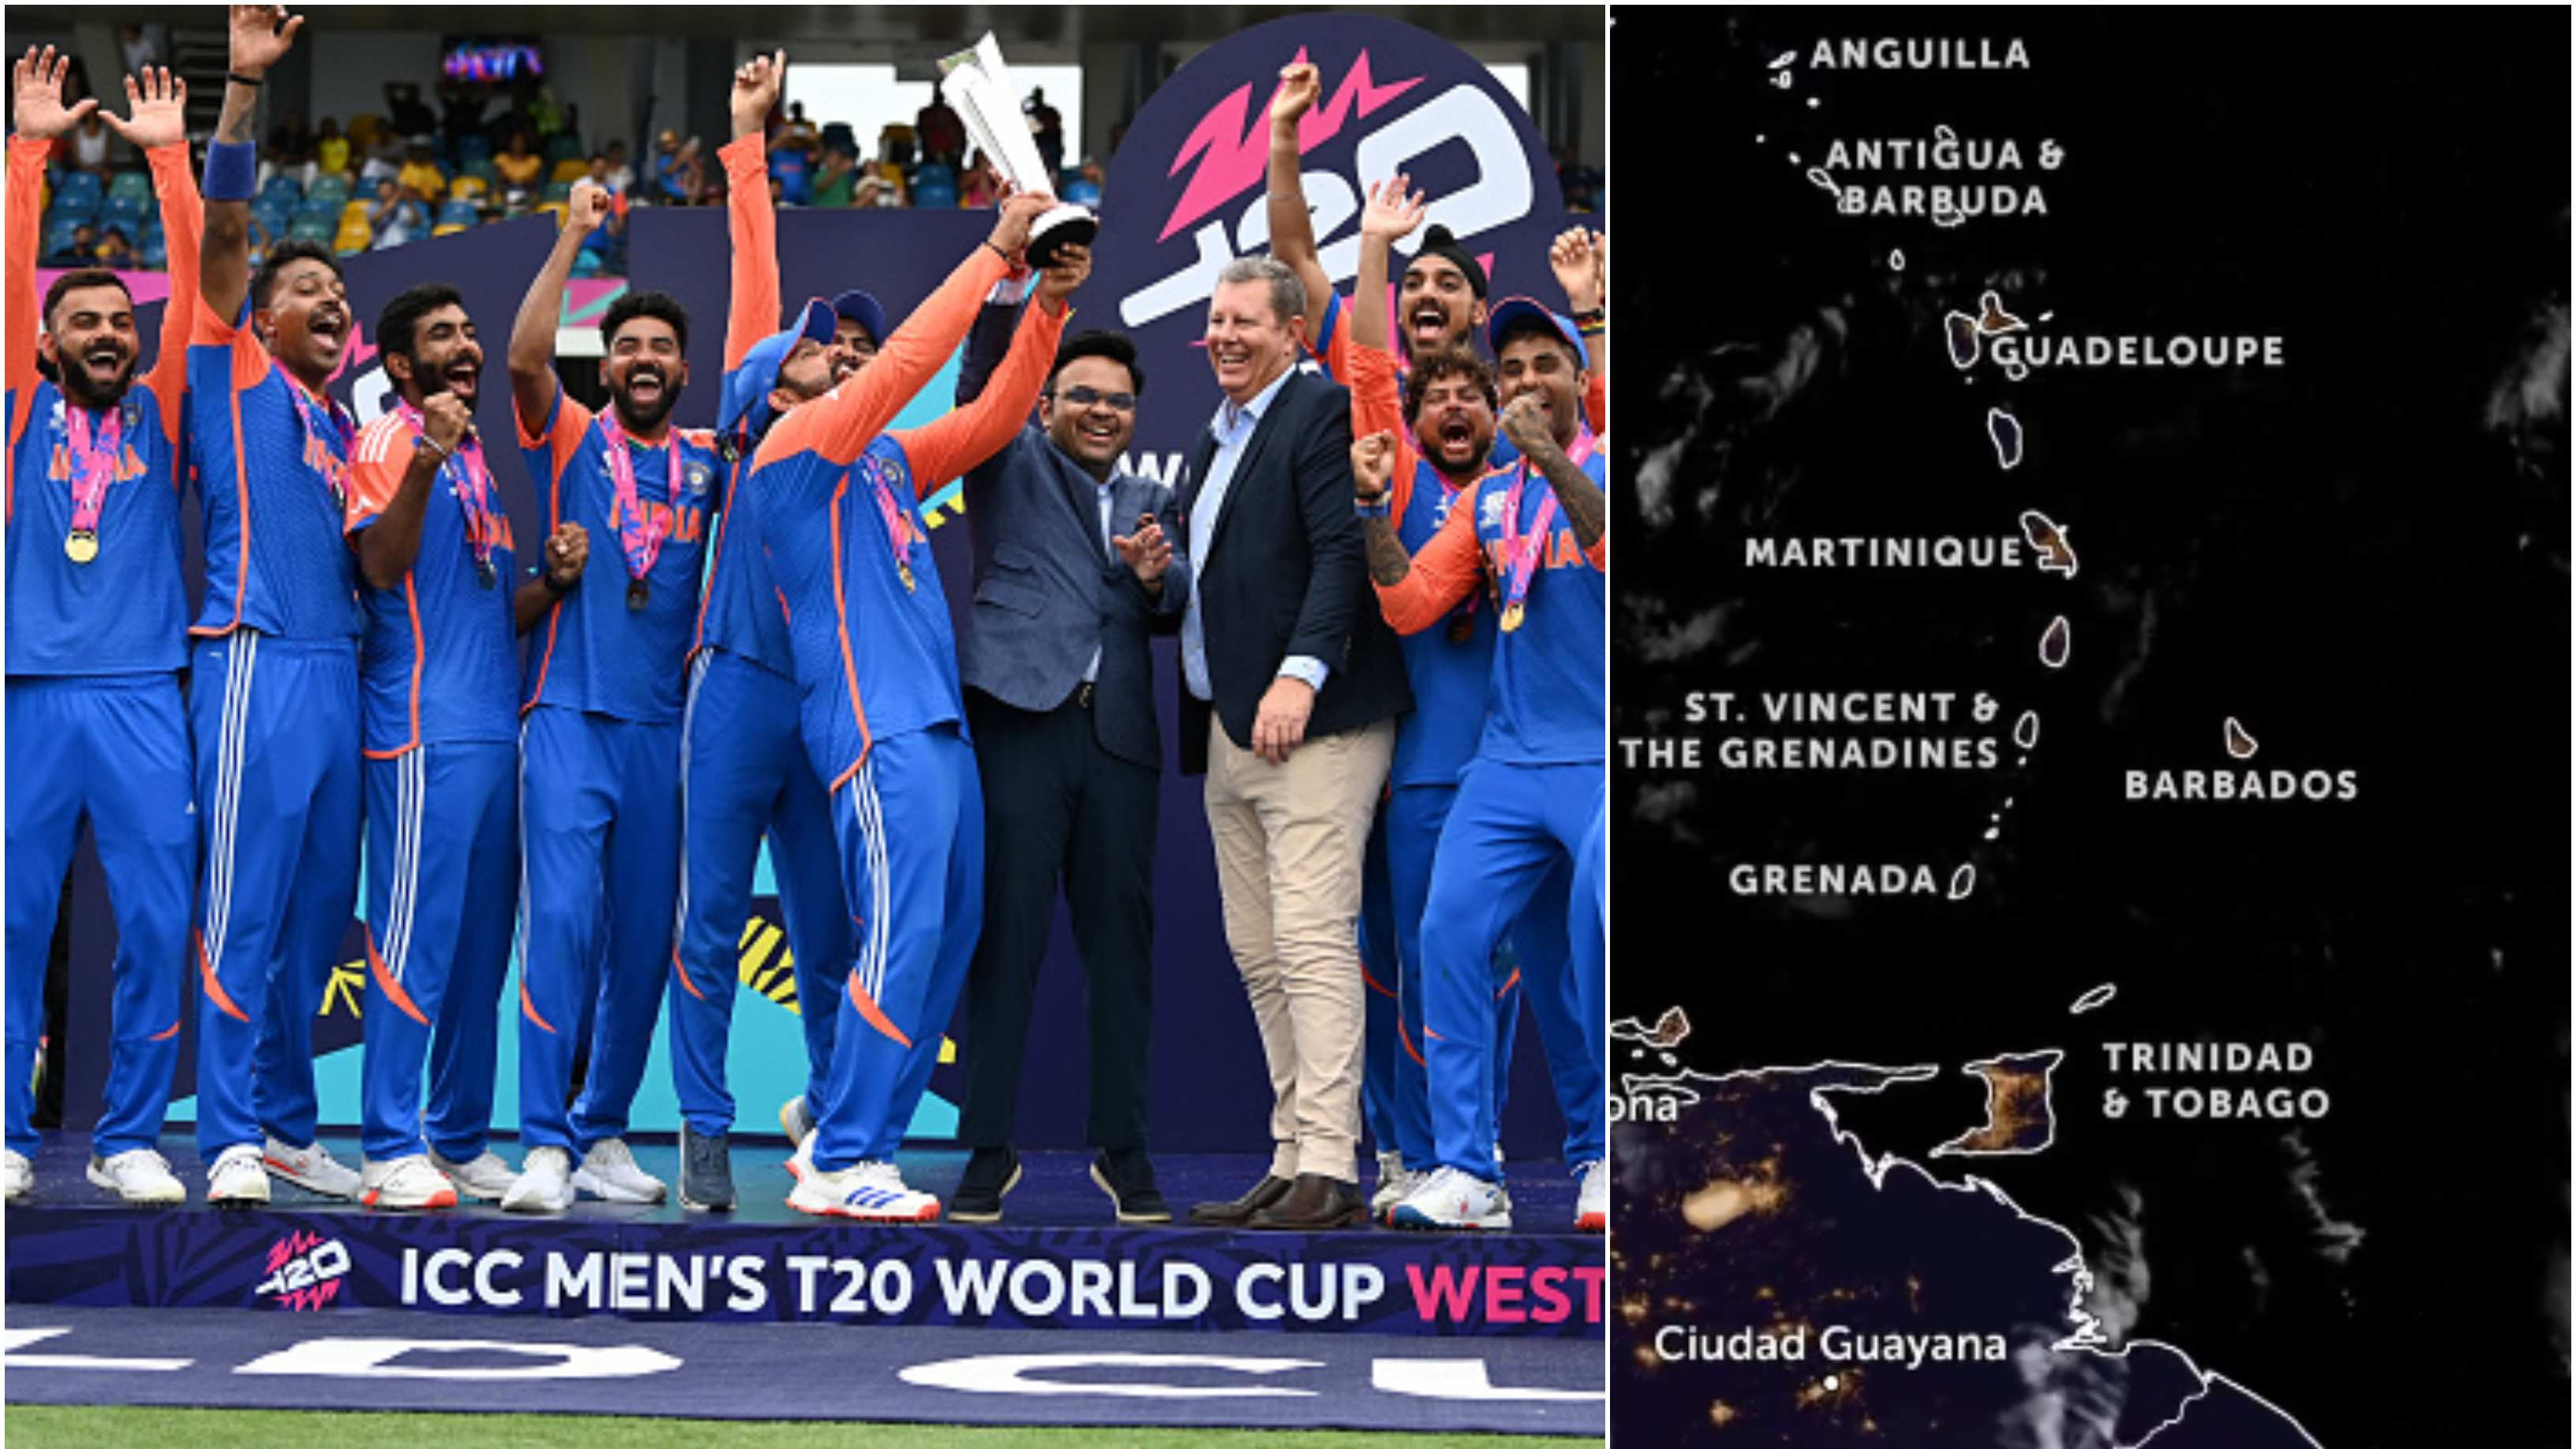 Hurricane threat delays Team India's departure from Barbados after T20 World Cup 2024 triumph